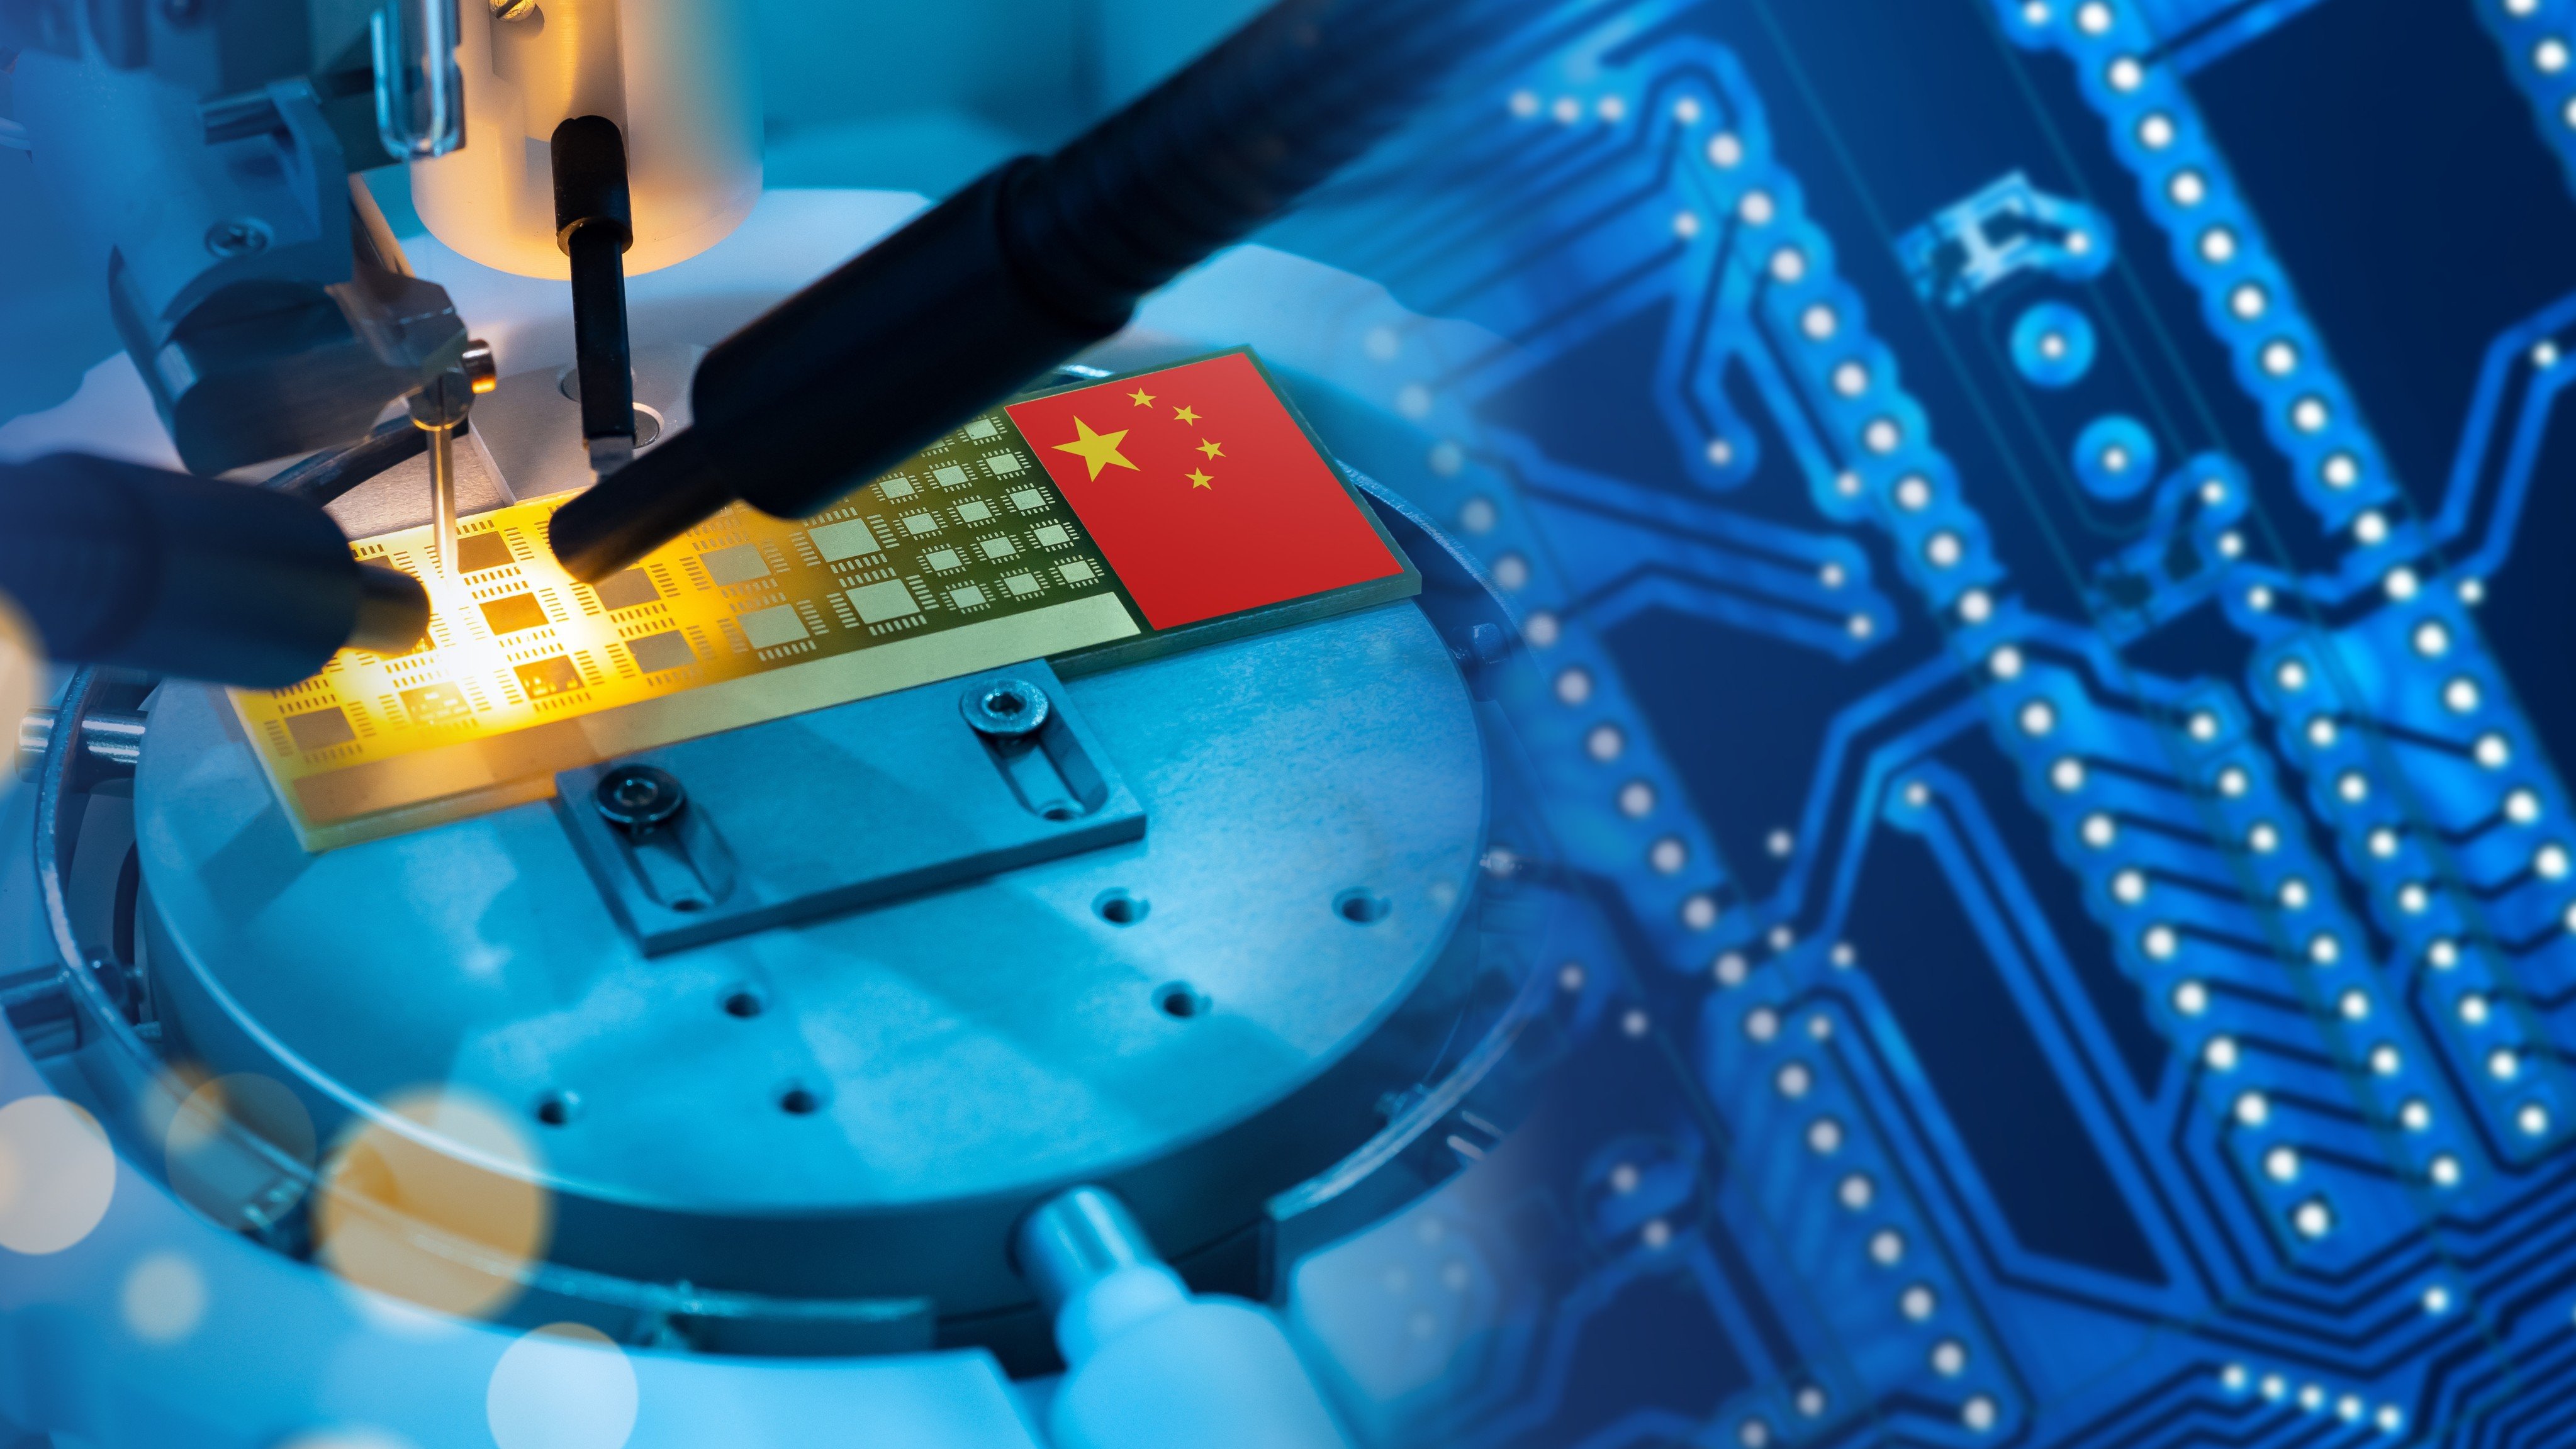 ASML, the world’s dominant supplier of lithography systems to chip makers, has been barred from selling its most advanced extreme ultraviolet machines to China since 2019. Illustration: Shutterstock